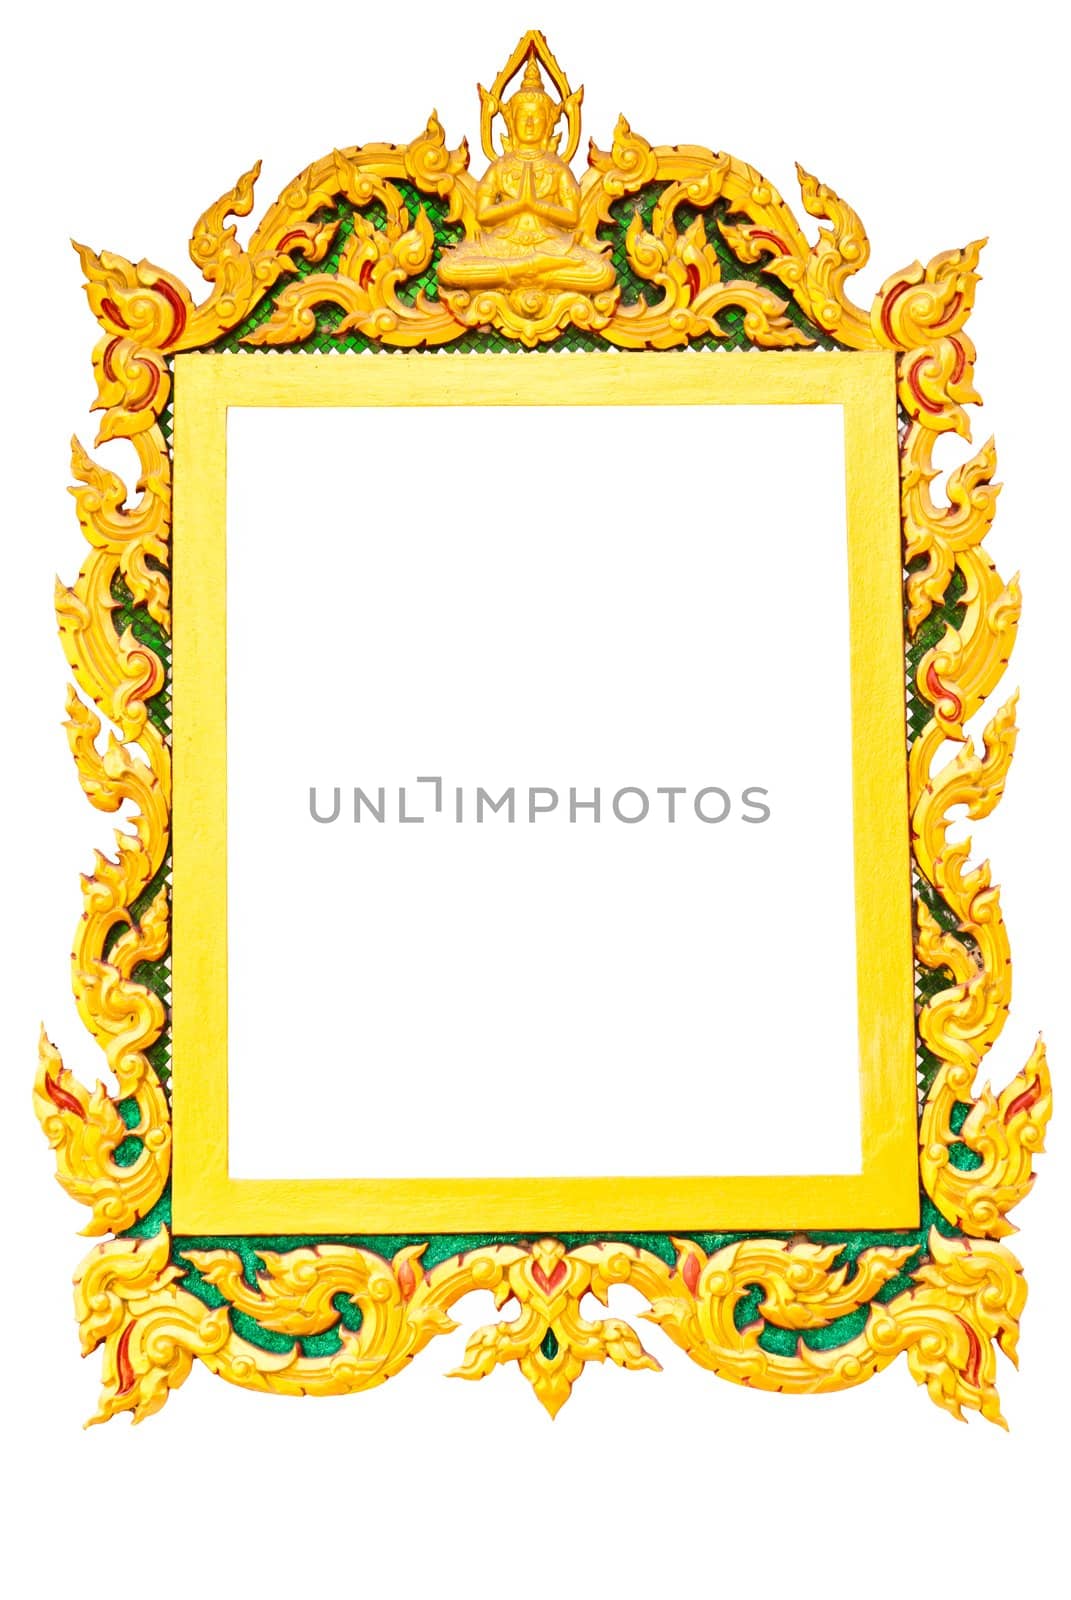 Old picture frame in white background
 by sasilsolutions